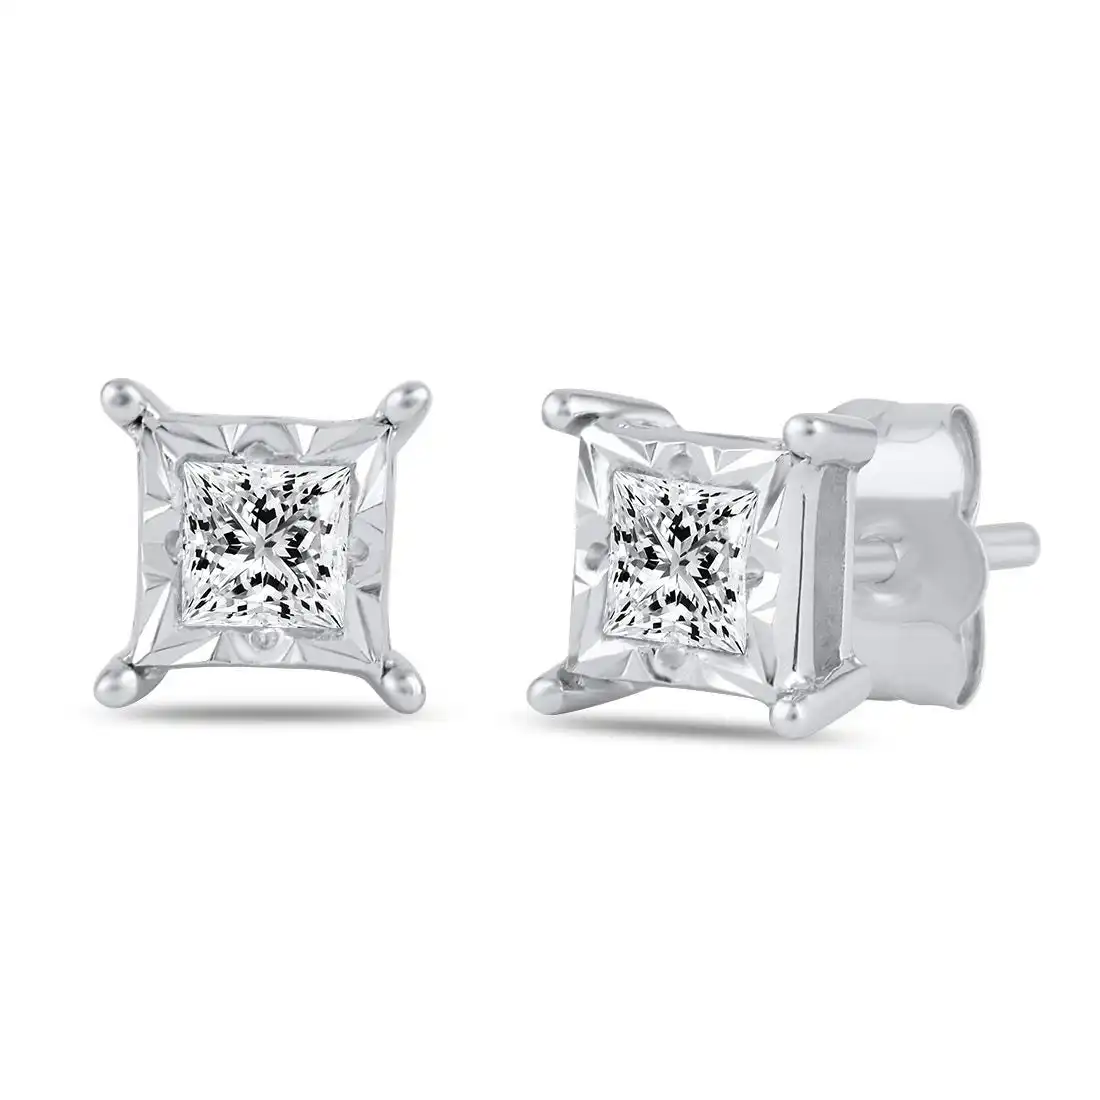 Tia Princess Cut Miracle Halo Earrings with 1/2ct of Diamonds in 9ct White Gold